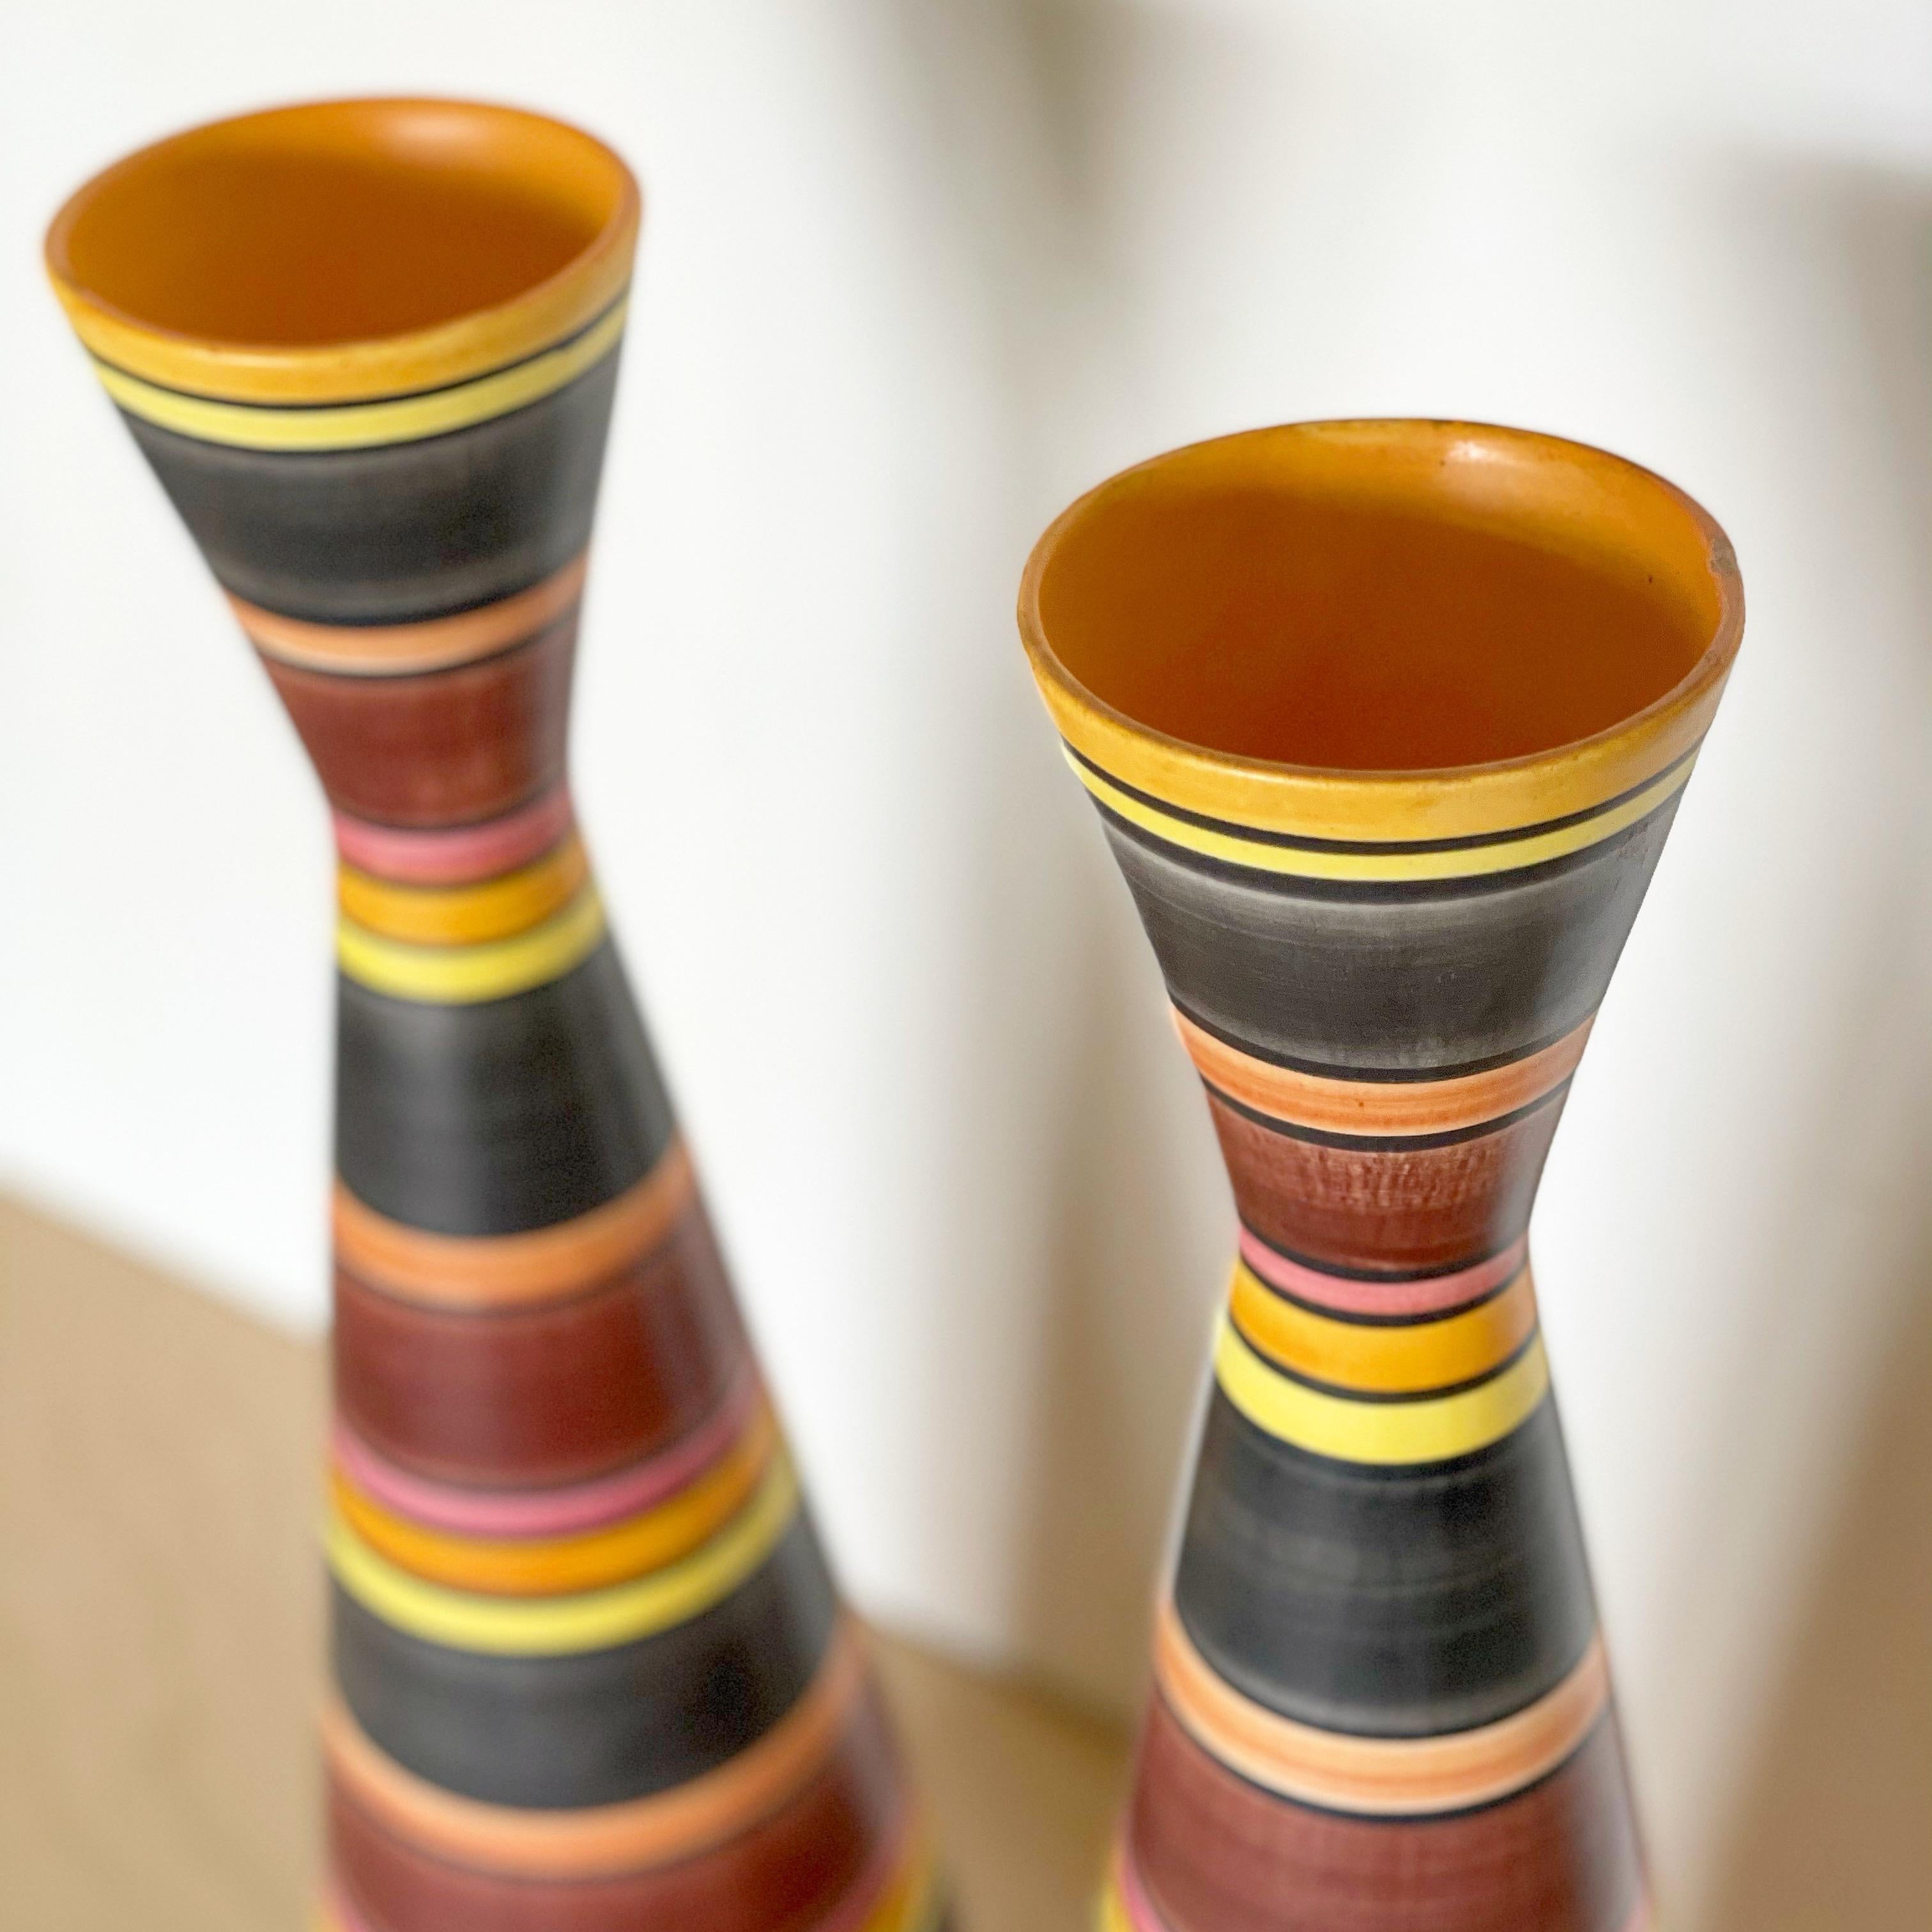 Pair of tall striped Italian modernist vases. Gorgeous form and colors. Shades of yellow, orange, green, red and pink.
Excellent original, unaltered condition.
Measures: D 5